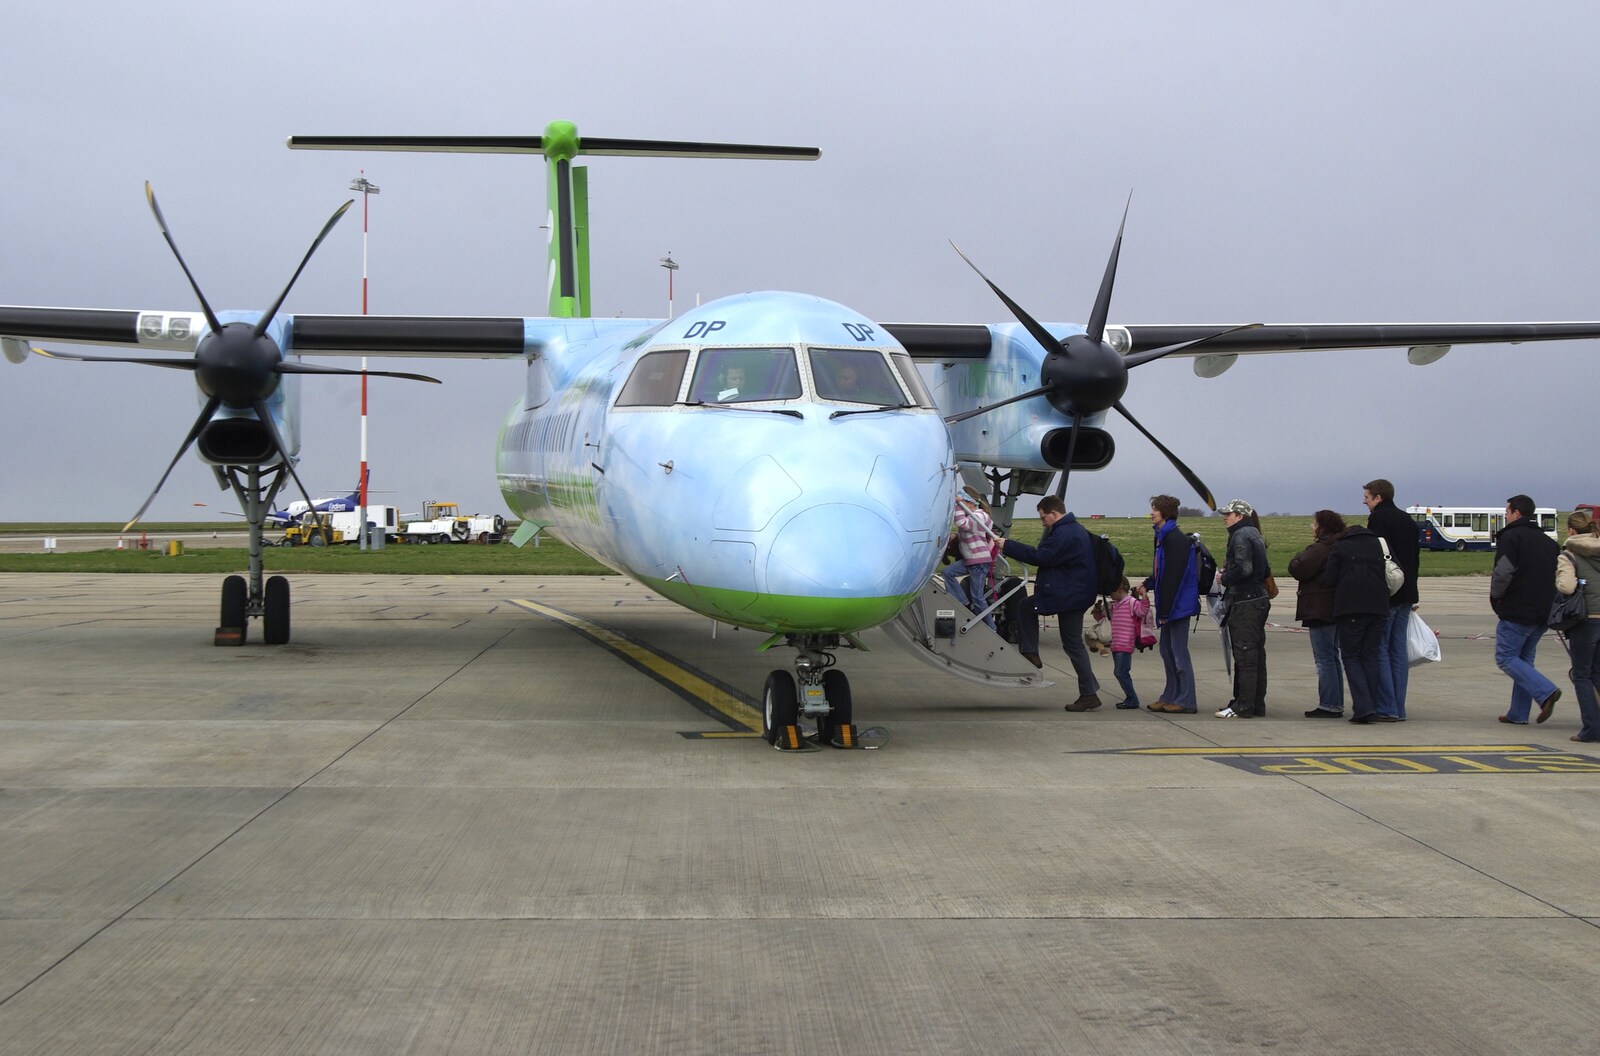 The FlyBe Dash 8 loads up on the tarmac from Easter in Dublin, Ireland - 21st March 2008